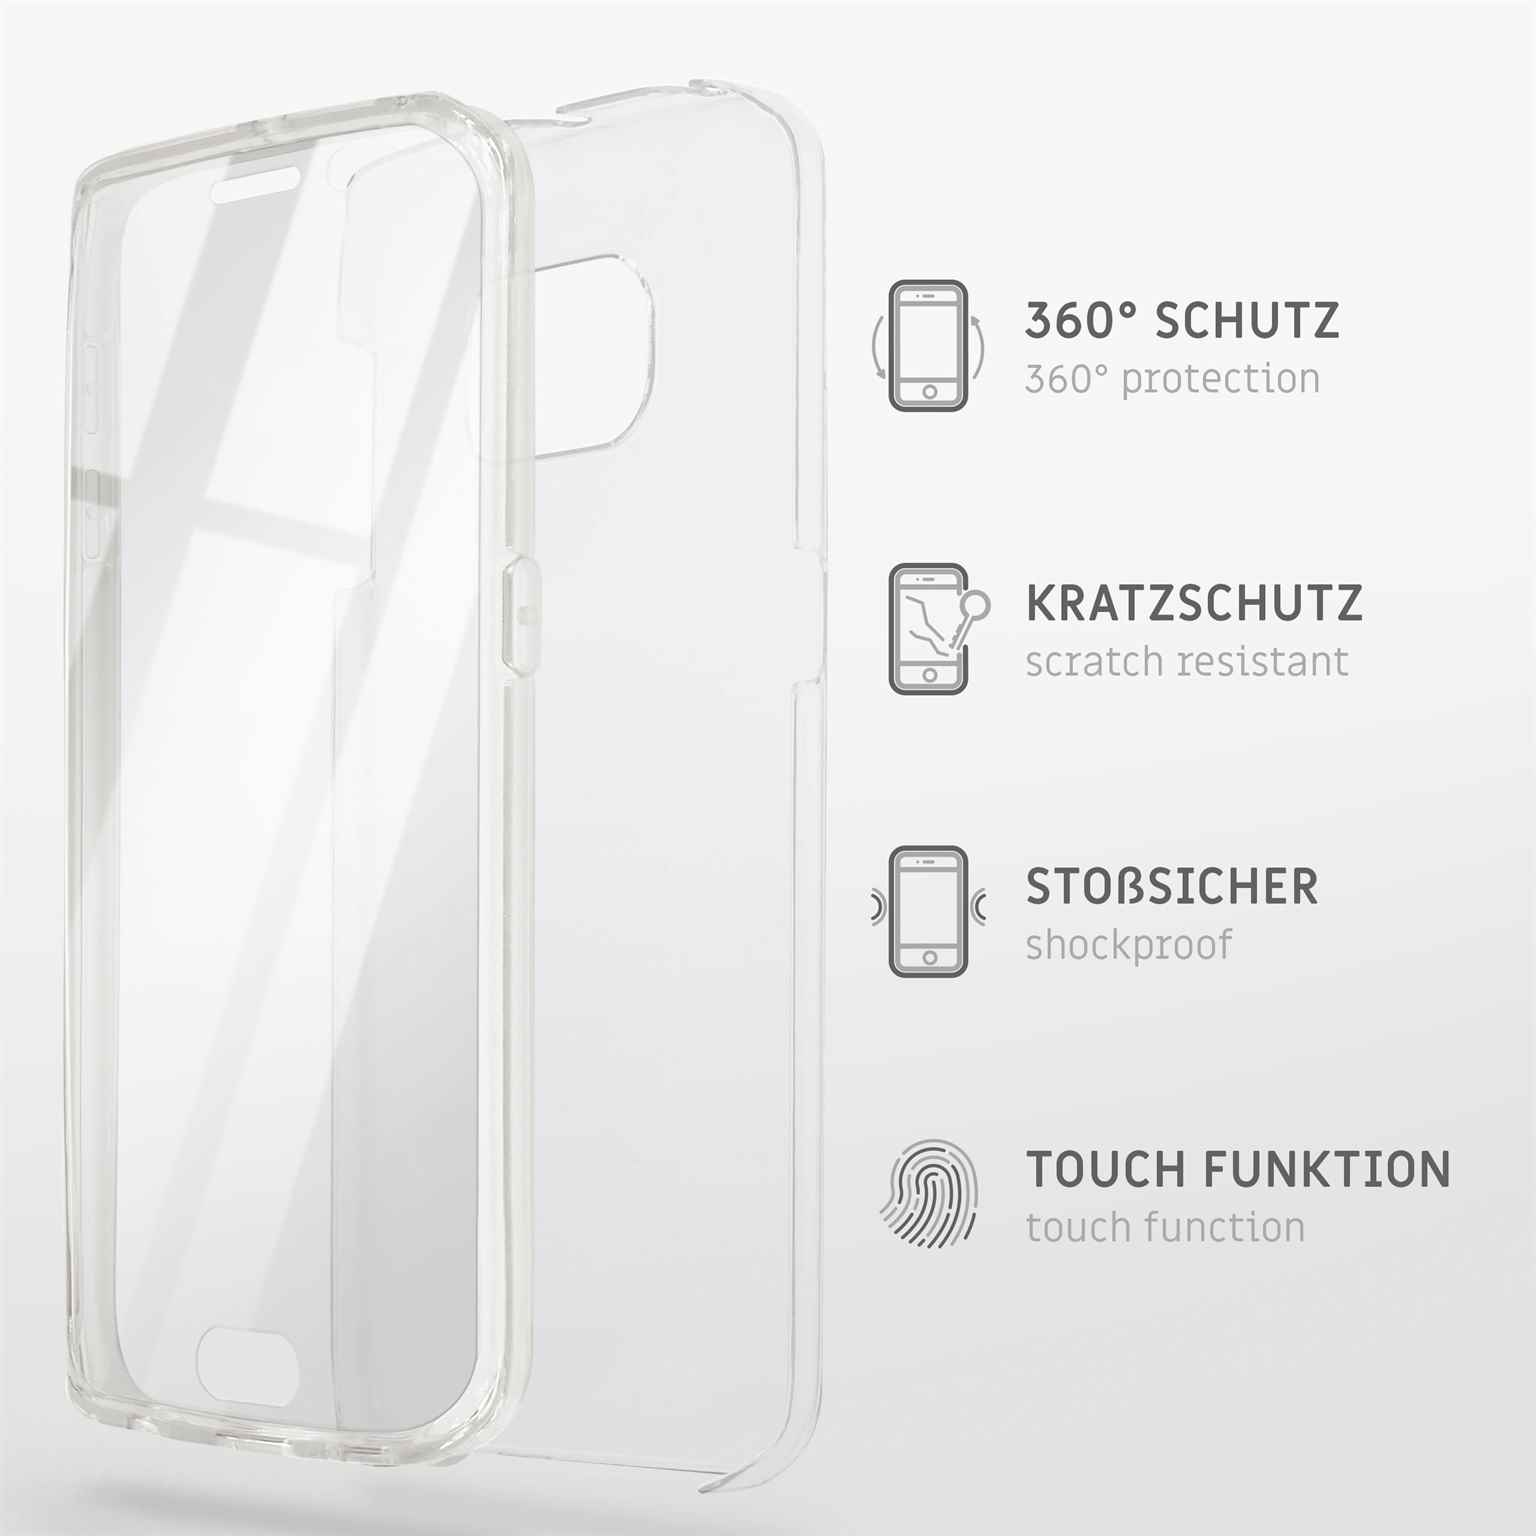 Case, Ultra-Clear ONEFLOW Cover, Samsung, Full Touch S9, Galaxy